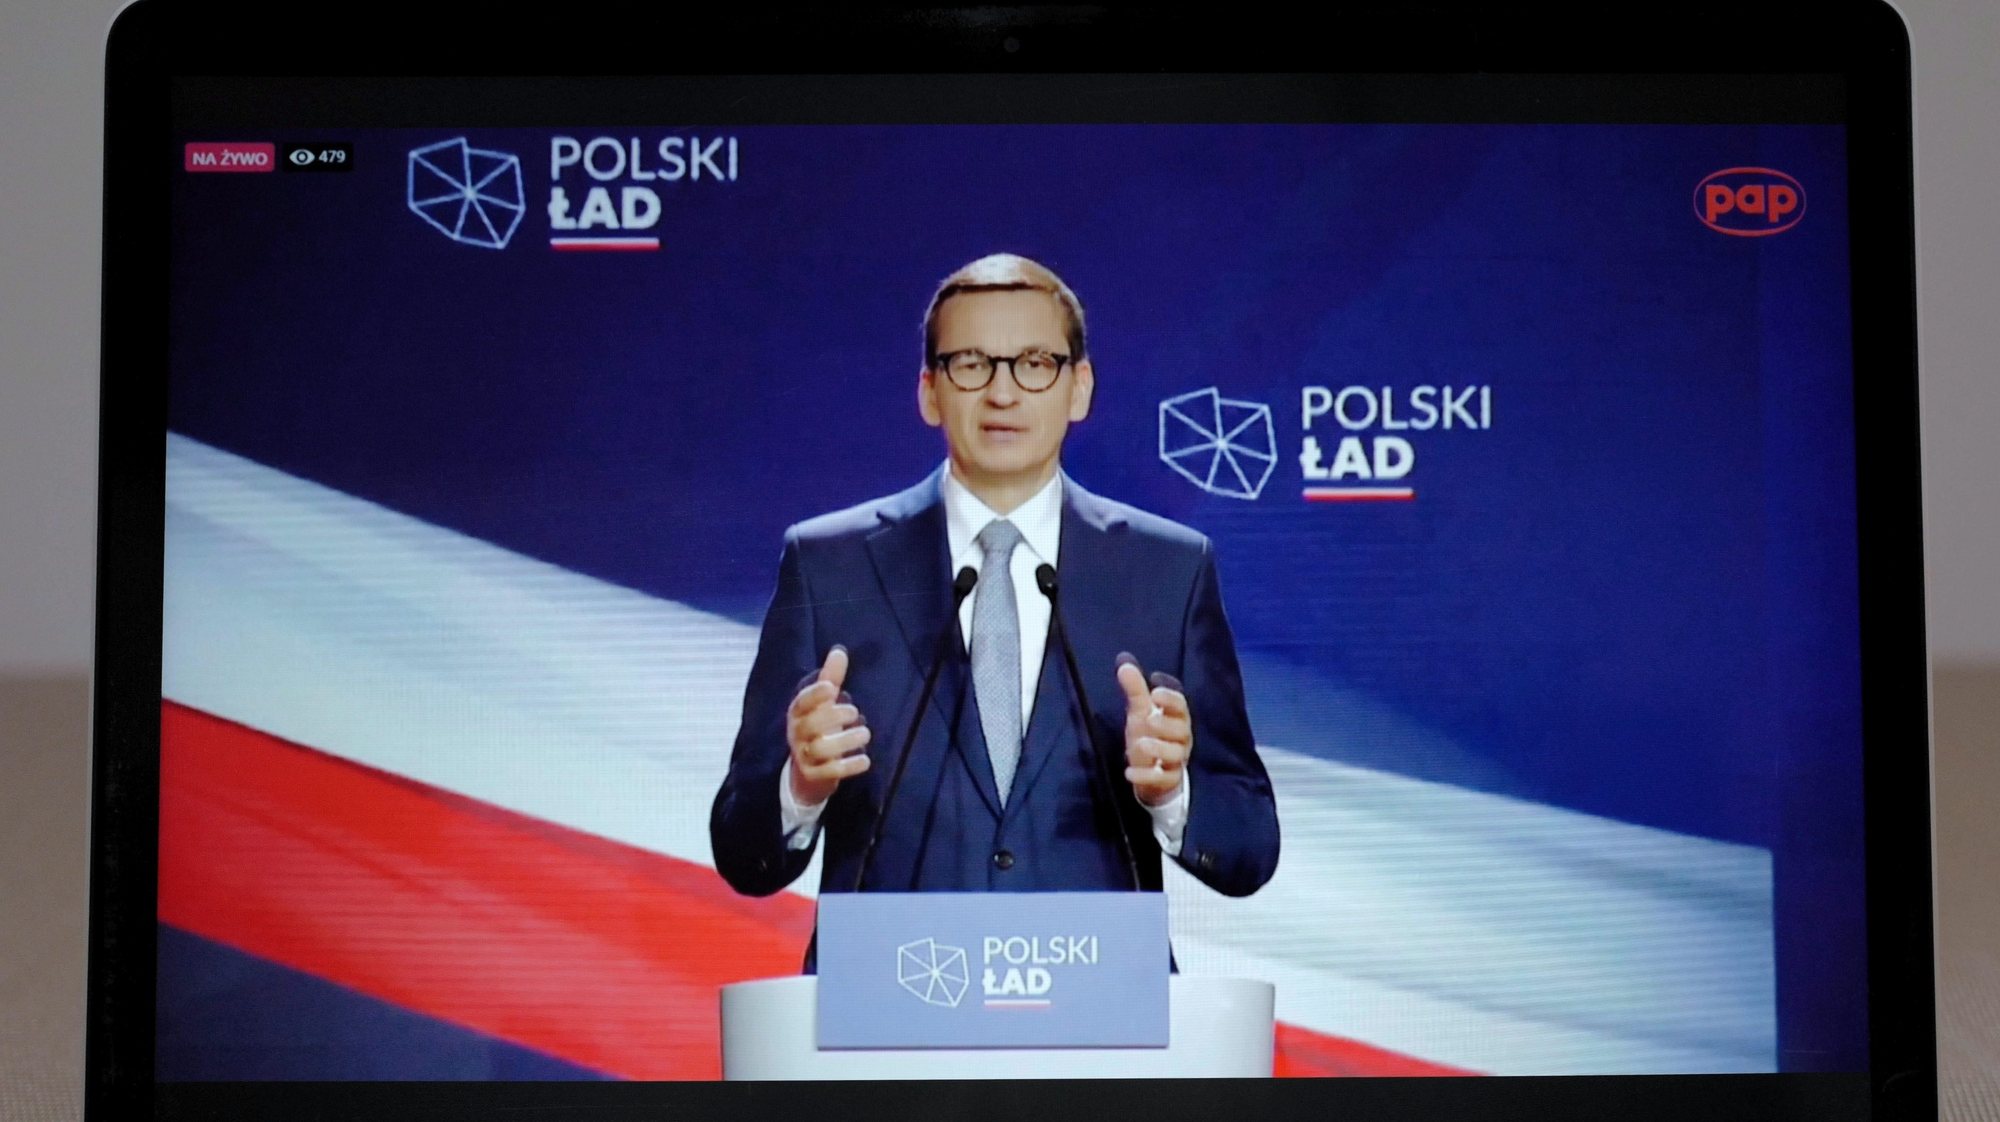 epa09242809 Polish Prime Minister Mateusz Morawiecki presents 10 key points of the government&#039;s Polish New Deal plan to revive the national economy after the Covid-19 pandemic during a speech watched on a screen in Warsaw, Poland, 02 June 2021. The plan, which envisages major investment in public infrastructure along with overhauls of the tax and healthcare systems, was made public last month but Mateusz Morawiecki added more details during a presentation on 02 June 2021.  EPA/Mateusz Marek POLAND OUT